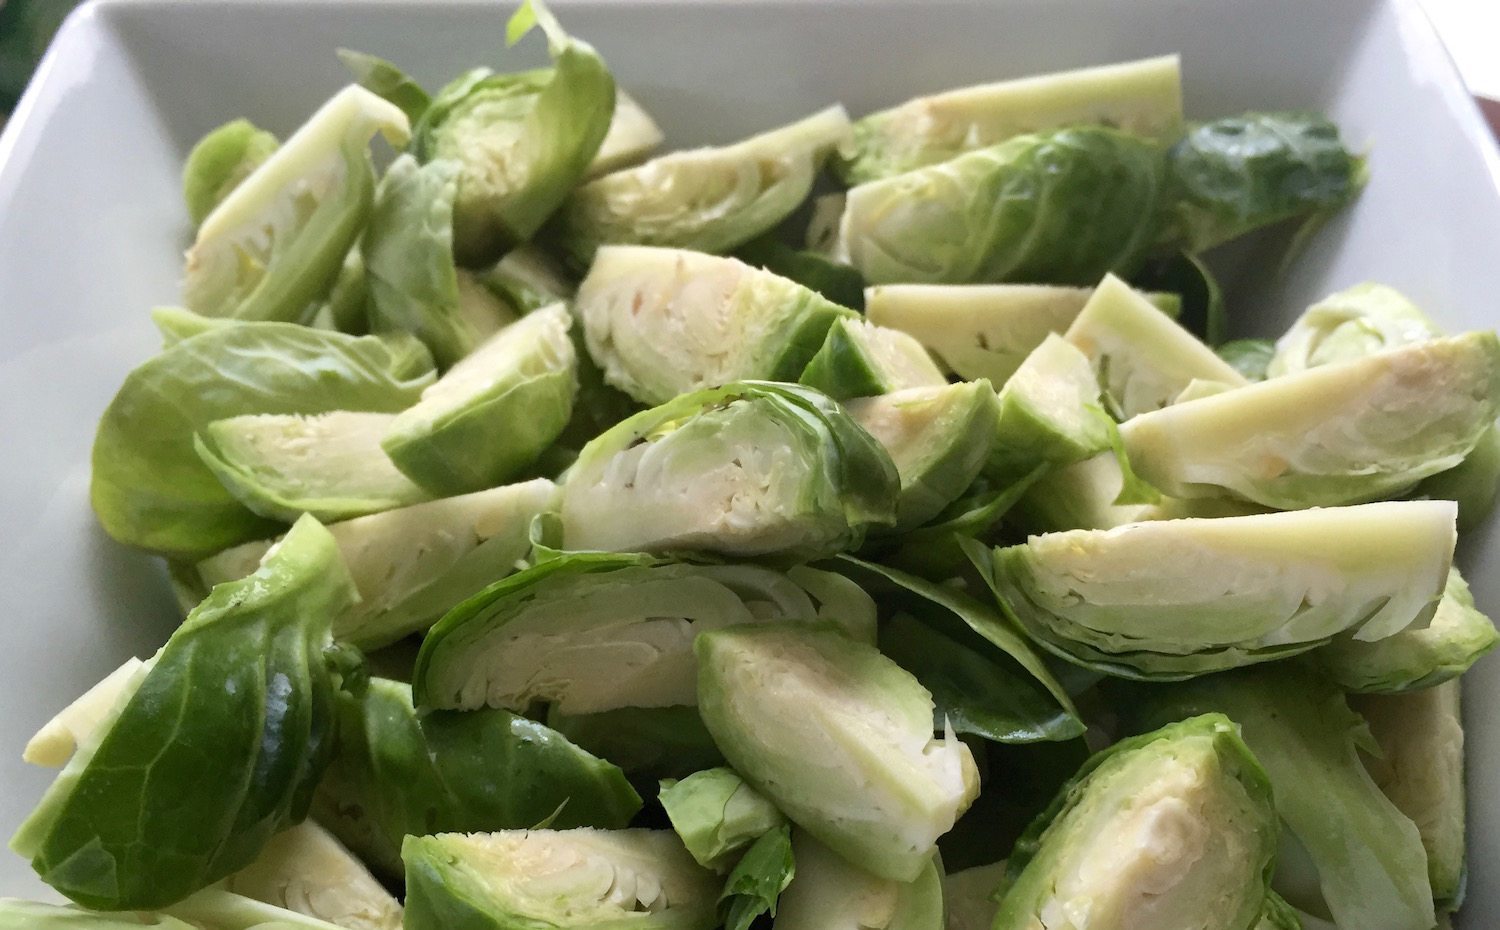 trimmed and chopped Brussels sprouts